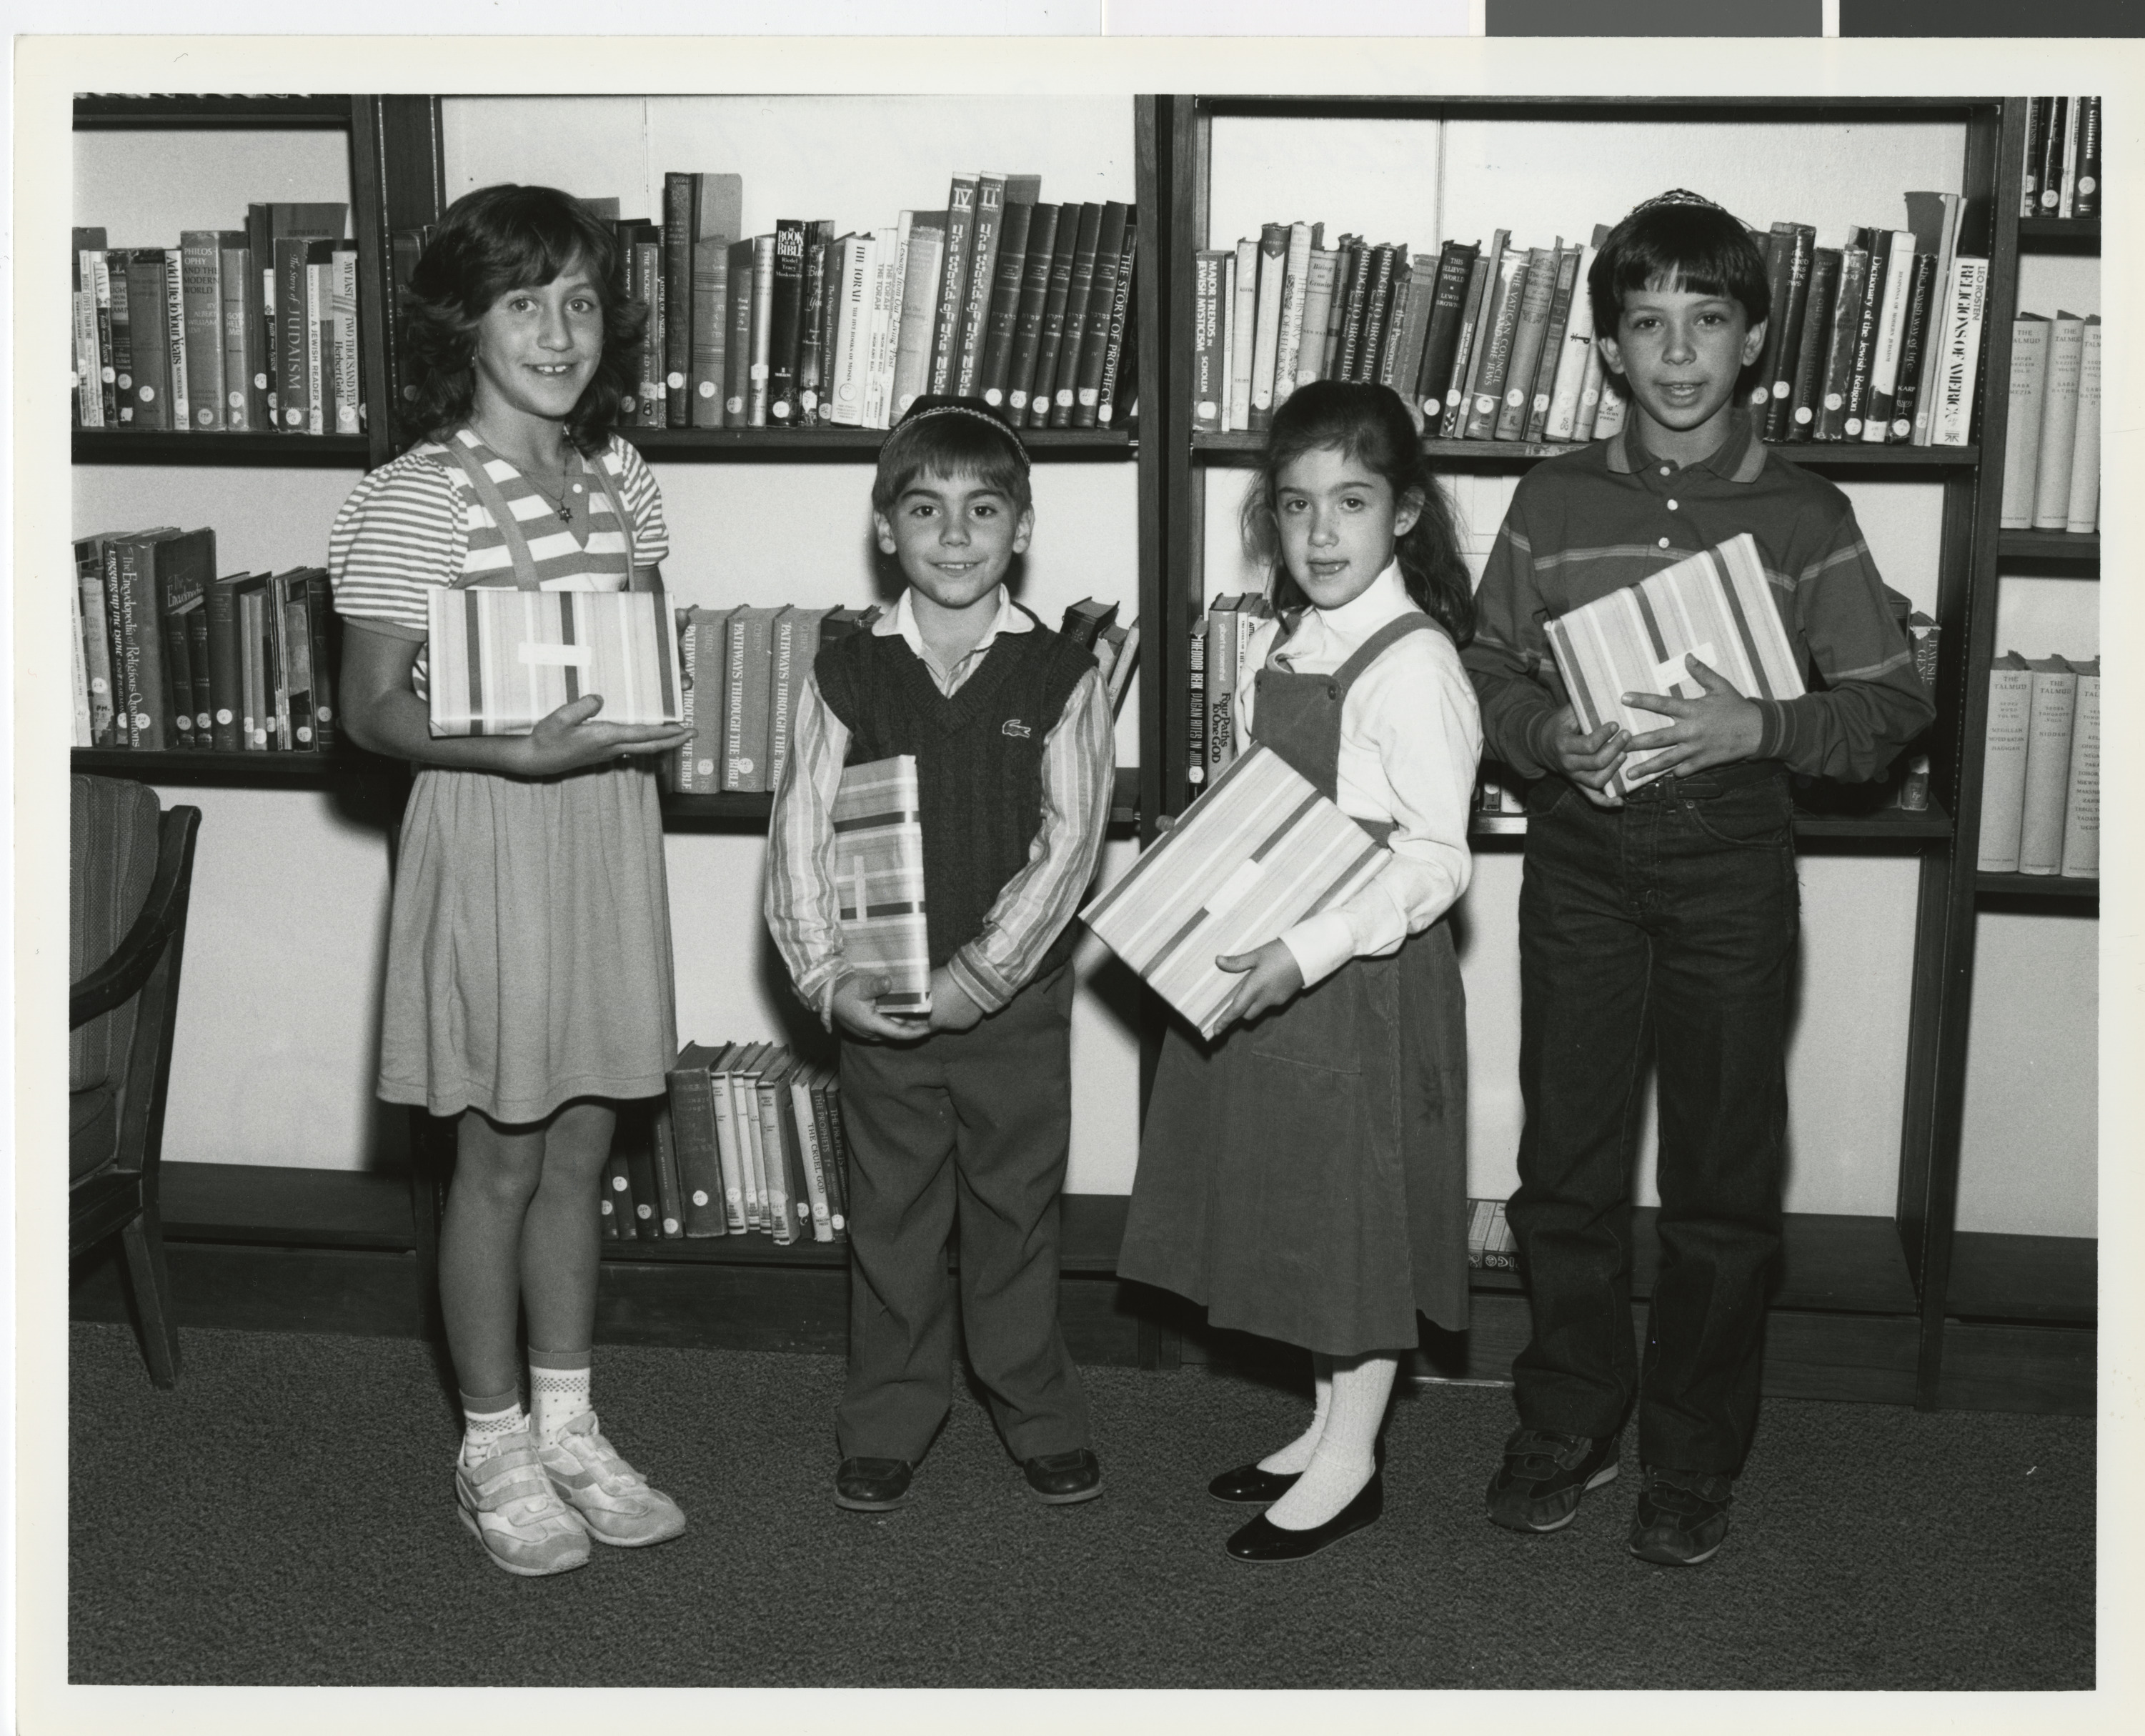 Photograph of grand prize winners of the Nate Mack Religious School of Temple Beth Sholom "Read a Jewish Book""book report contest, 1980s